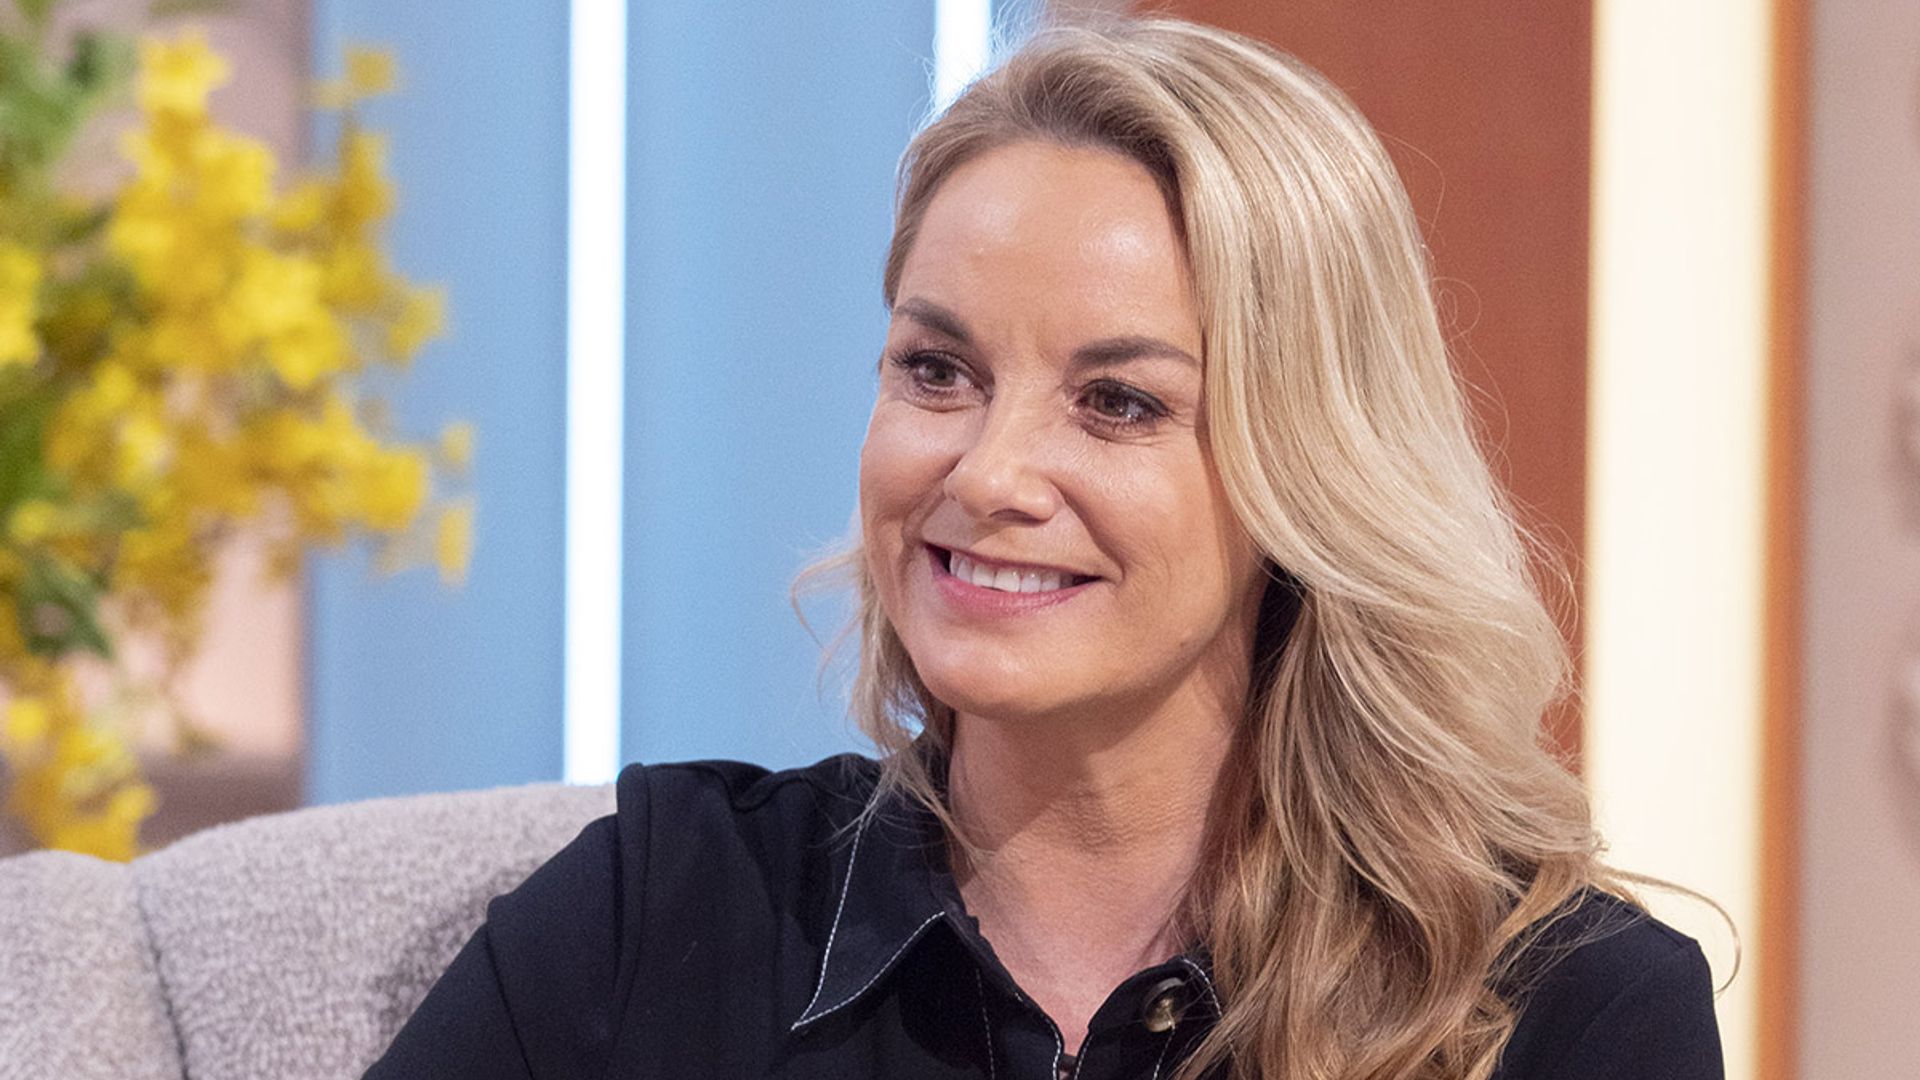 Tamzin Outhwaite breaks silence on reports she rescued three children from drowning